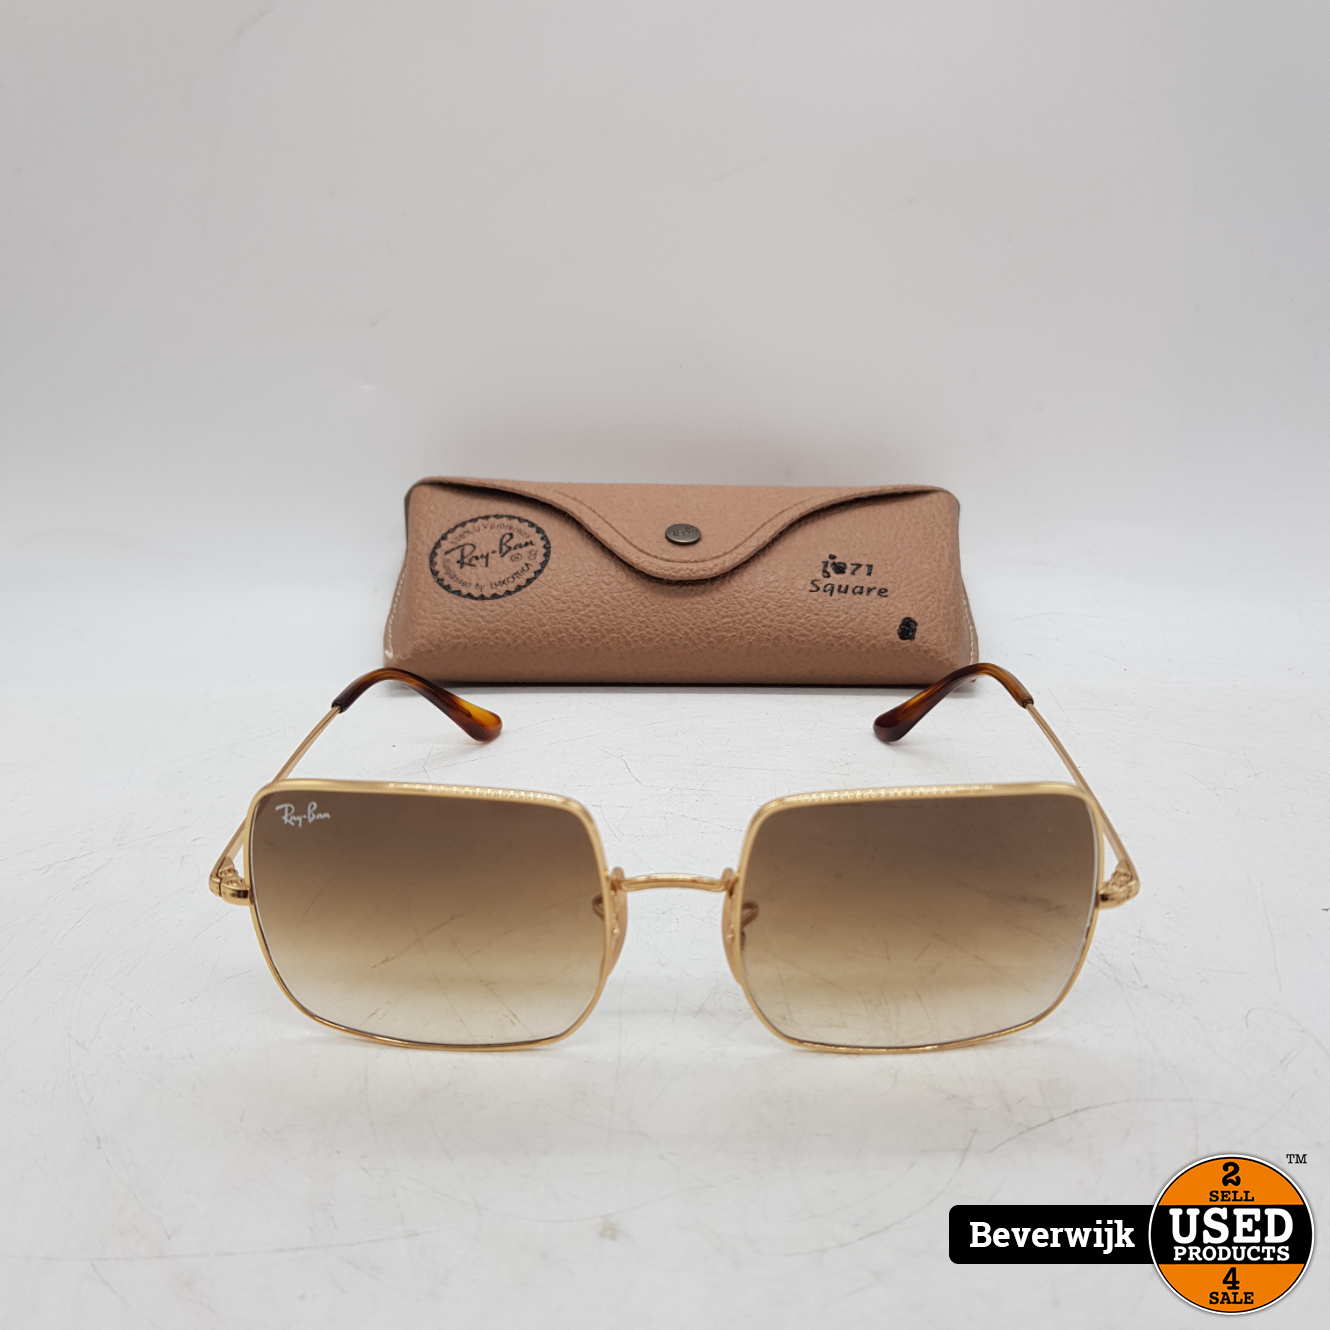 Ansichtkaart server Overgang Ray Ban RB1971 Zonnebril - In Nette Staat - Used Products Beverwijk